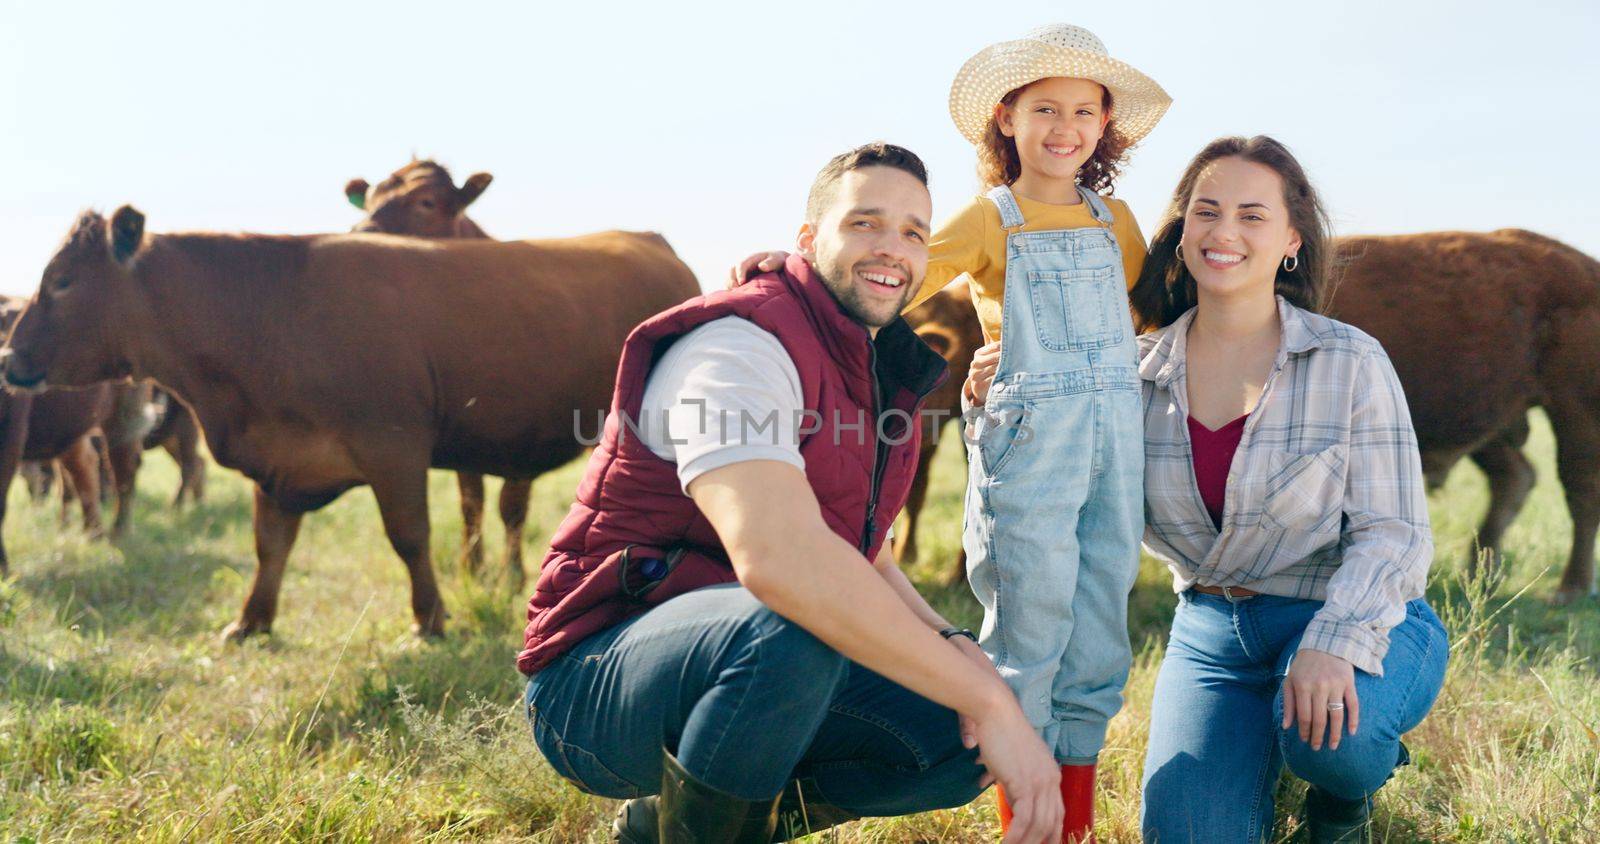 Farm, portrait and family bonding in nature, looking at animals and learning about livestock. Farming, agriculture and farmer parents bonding with girl on sustainable cattle business, relax and happy.